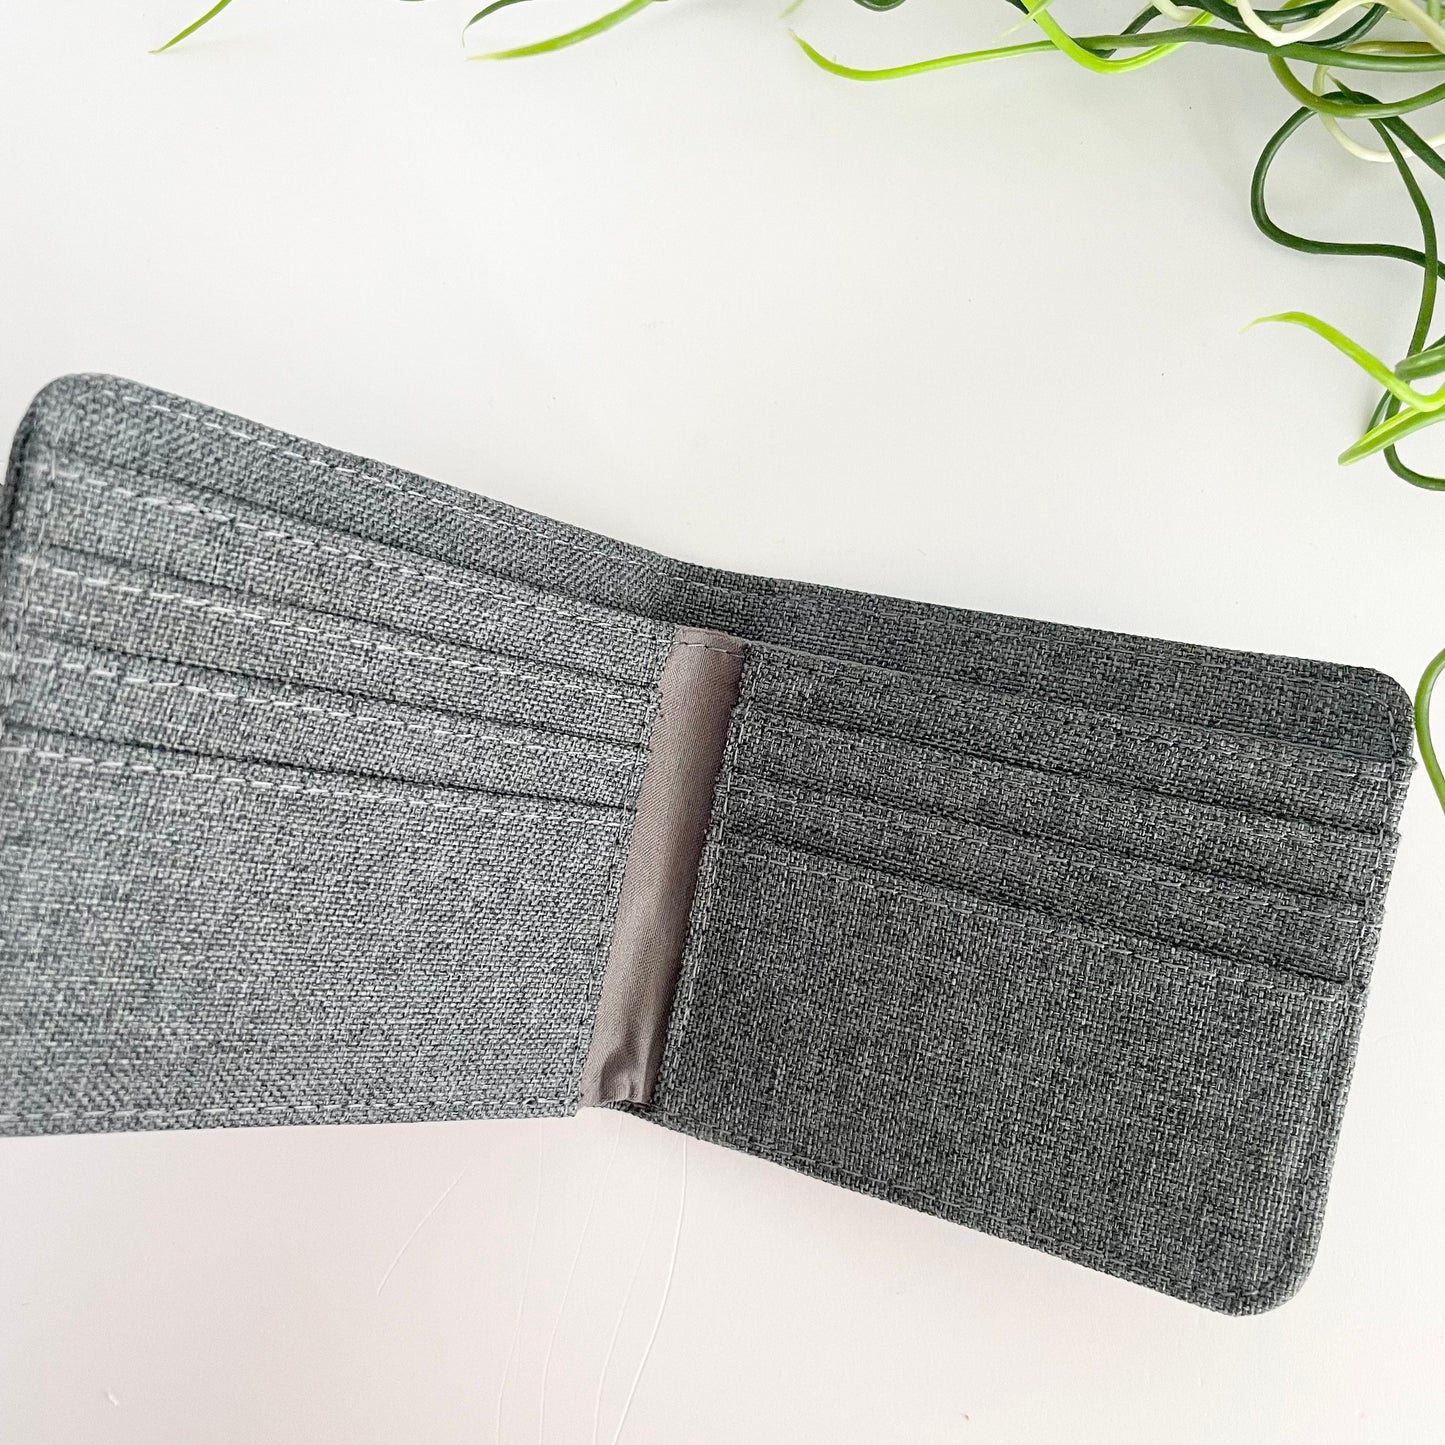 Personalised grey wallet. Men wallets for Christmas gift. Dad stocking filler, Xmas gifts for him, colleague secret Santa gift